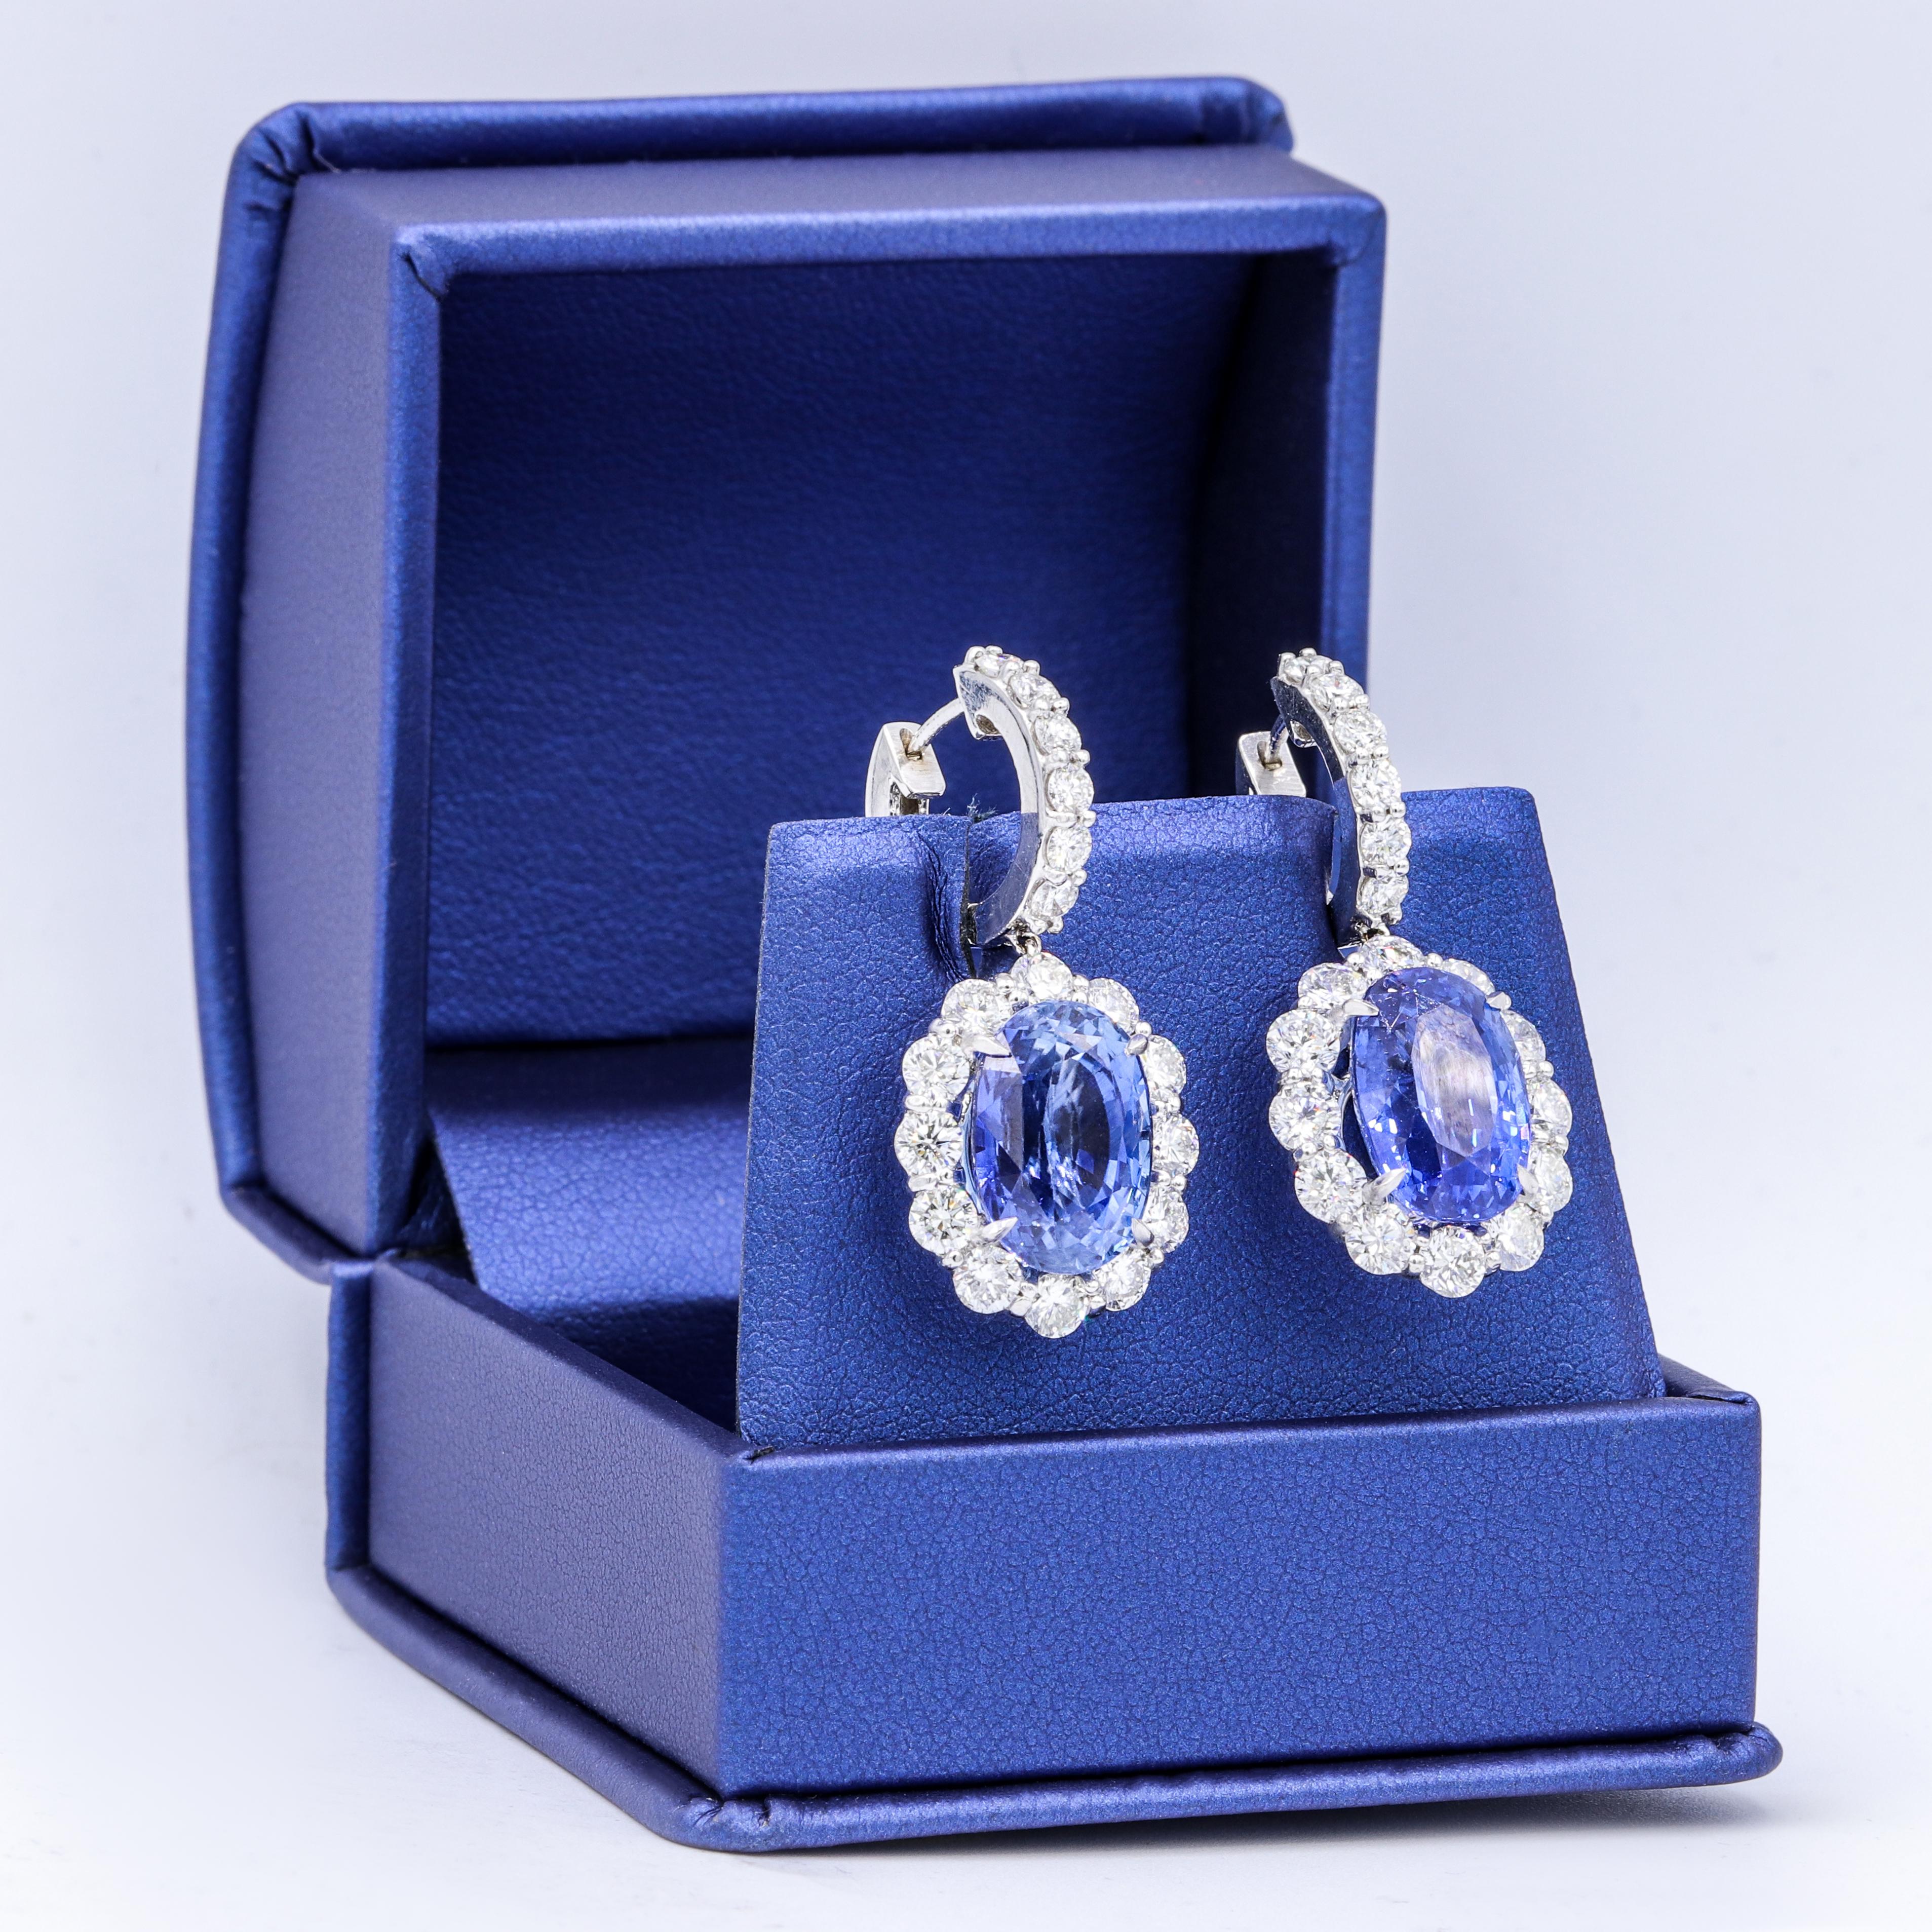 Classic sapphire diamond 18K white gold earring with GIA certified violetish blue sapphires 7.19 ct & 7.38 ct set with 4.80 ct  round diamonds all around.